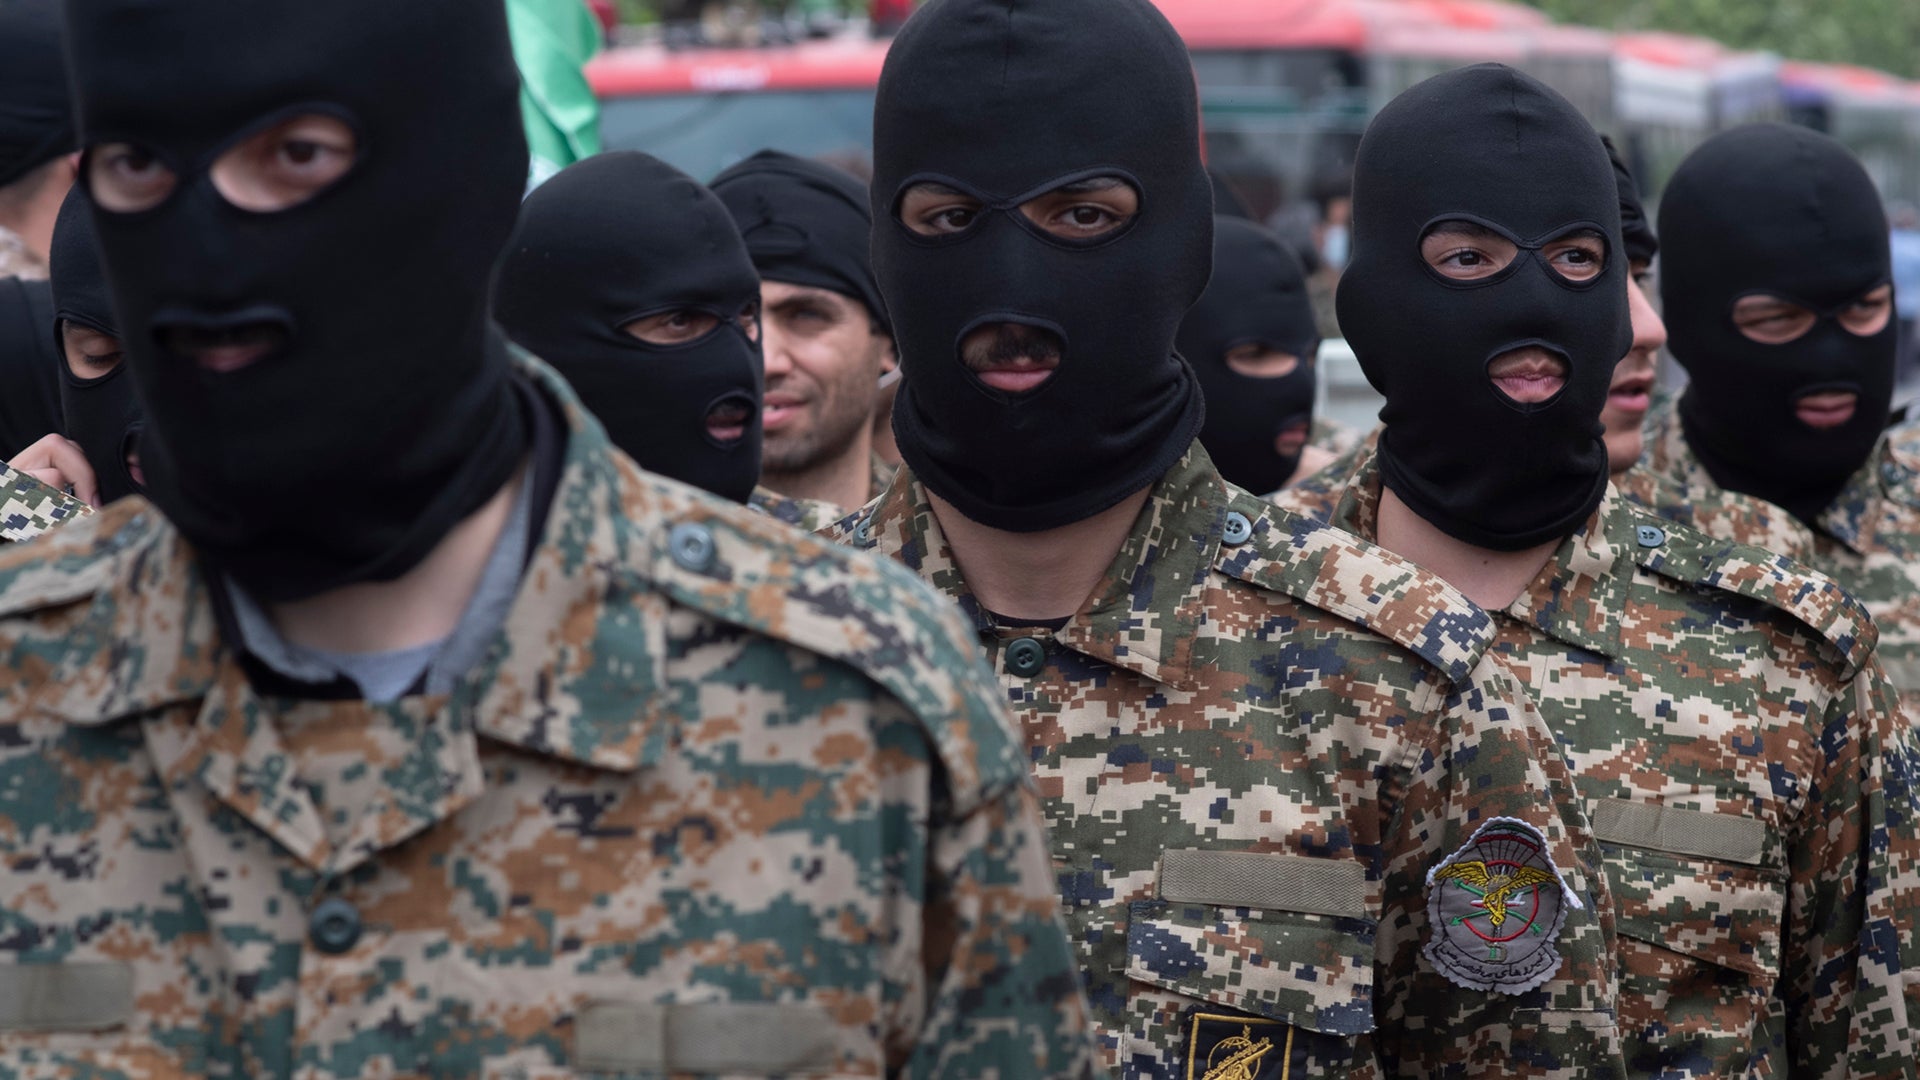 Islamic Revolutionary Guard Corps (IRGC) military personnel stand guard on an avenue in downtown Tehran during a rally commemorating the International Quds Day, also known as the Jerusalem day, on April 29, 2022. (Photo by Morteza Nikoubazl/NurPhoto via Getty Images)